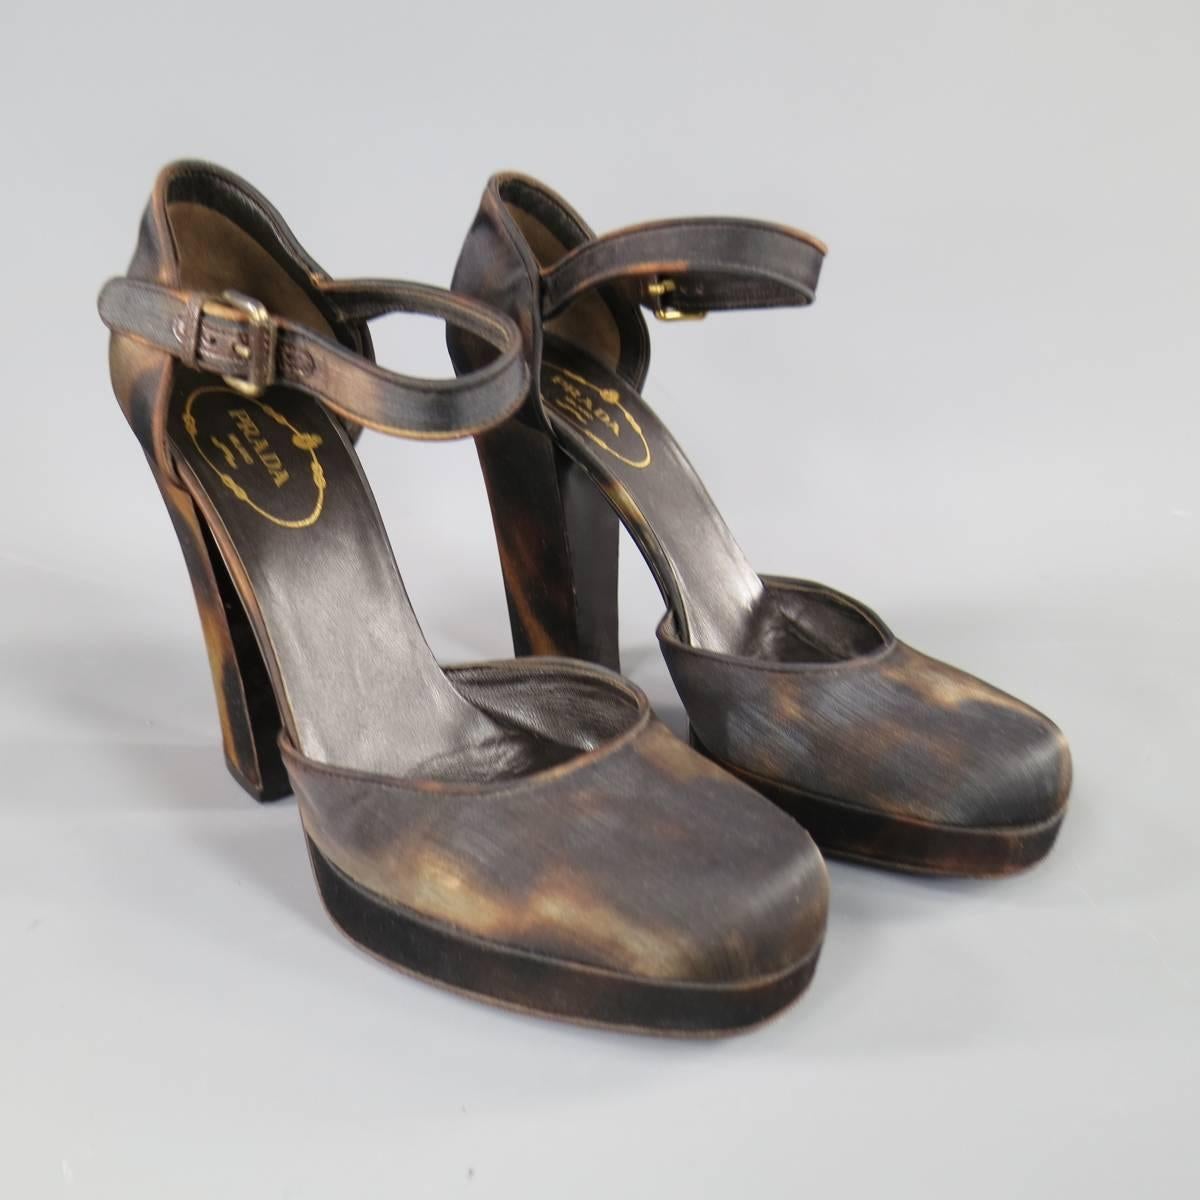 These fabulous PRADA platforms come in a semi matte tortoise shell print satin fabric and feature a chunky retro heel and Mary Jane ankle strap. Made in Italy.
 
Good Pre-Owned Condition.
Marked: 38.5
 
Measurements:
 
Heel: 4.75